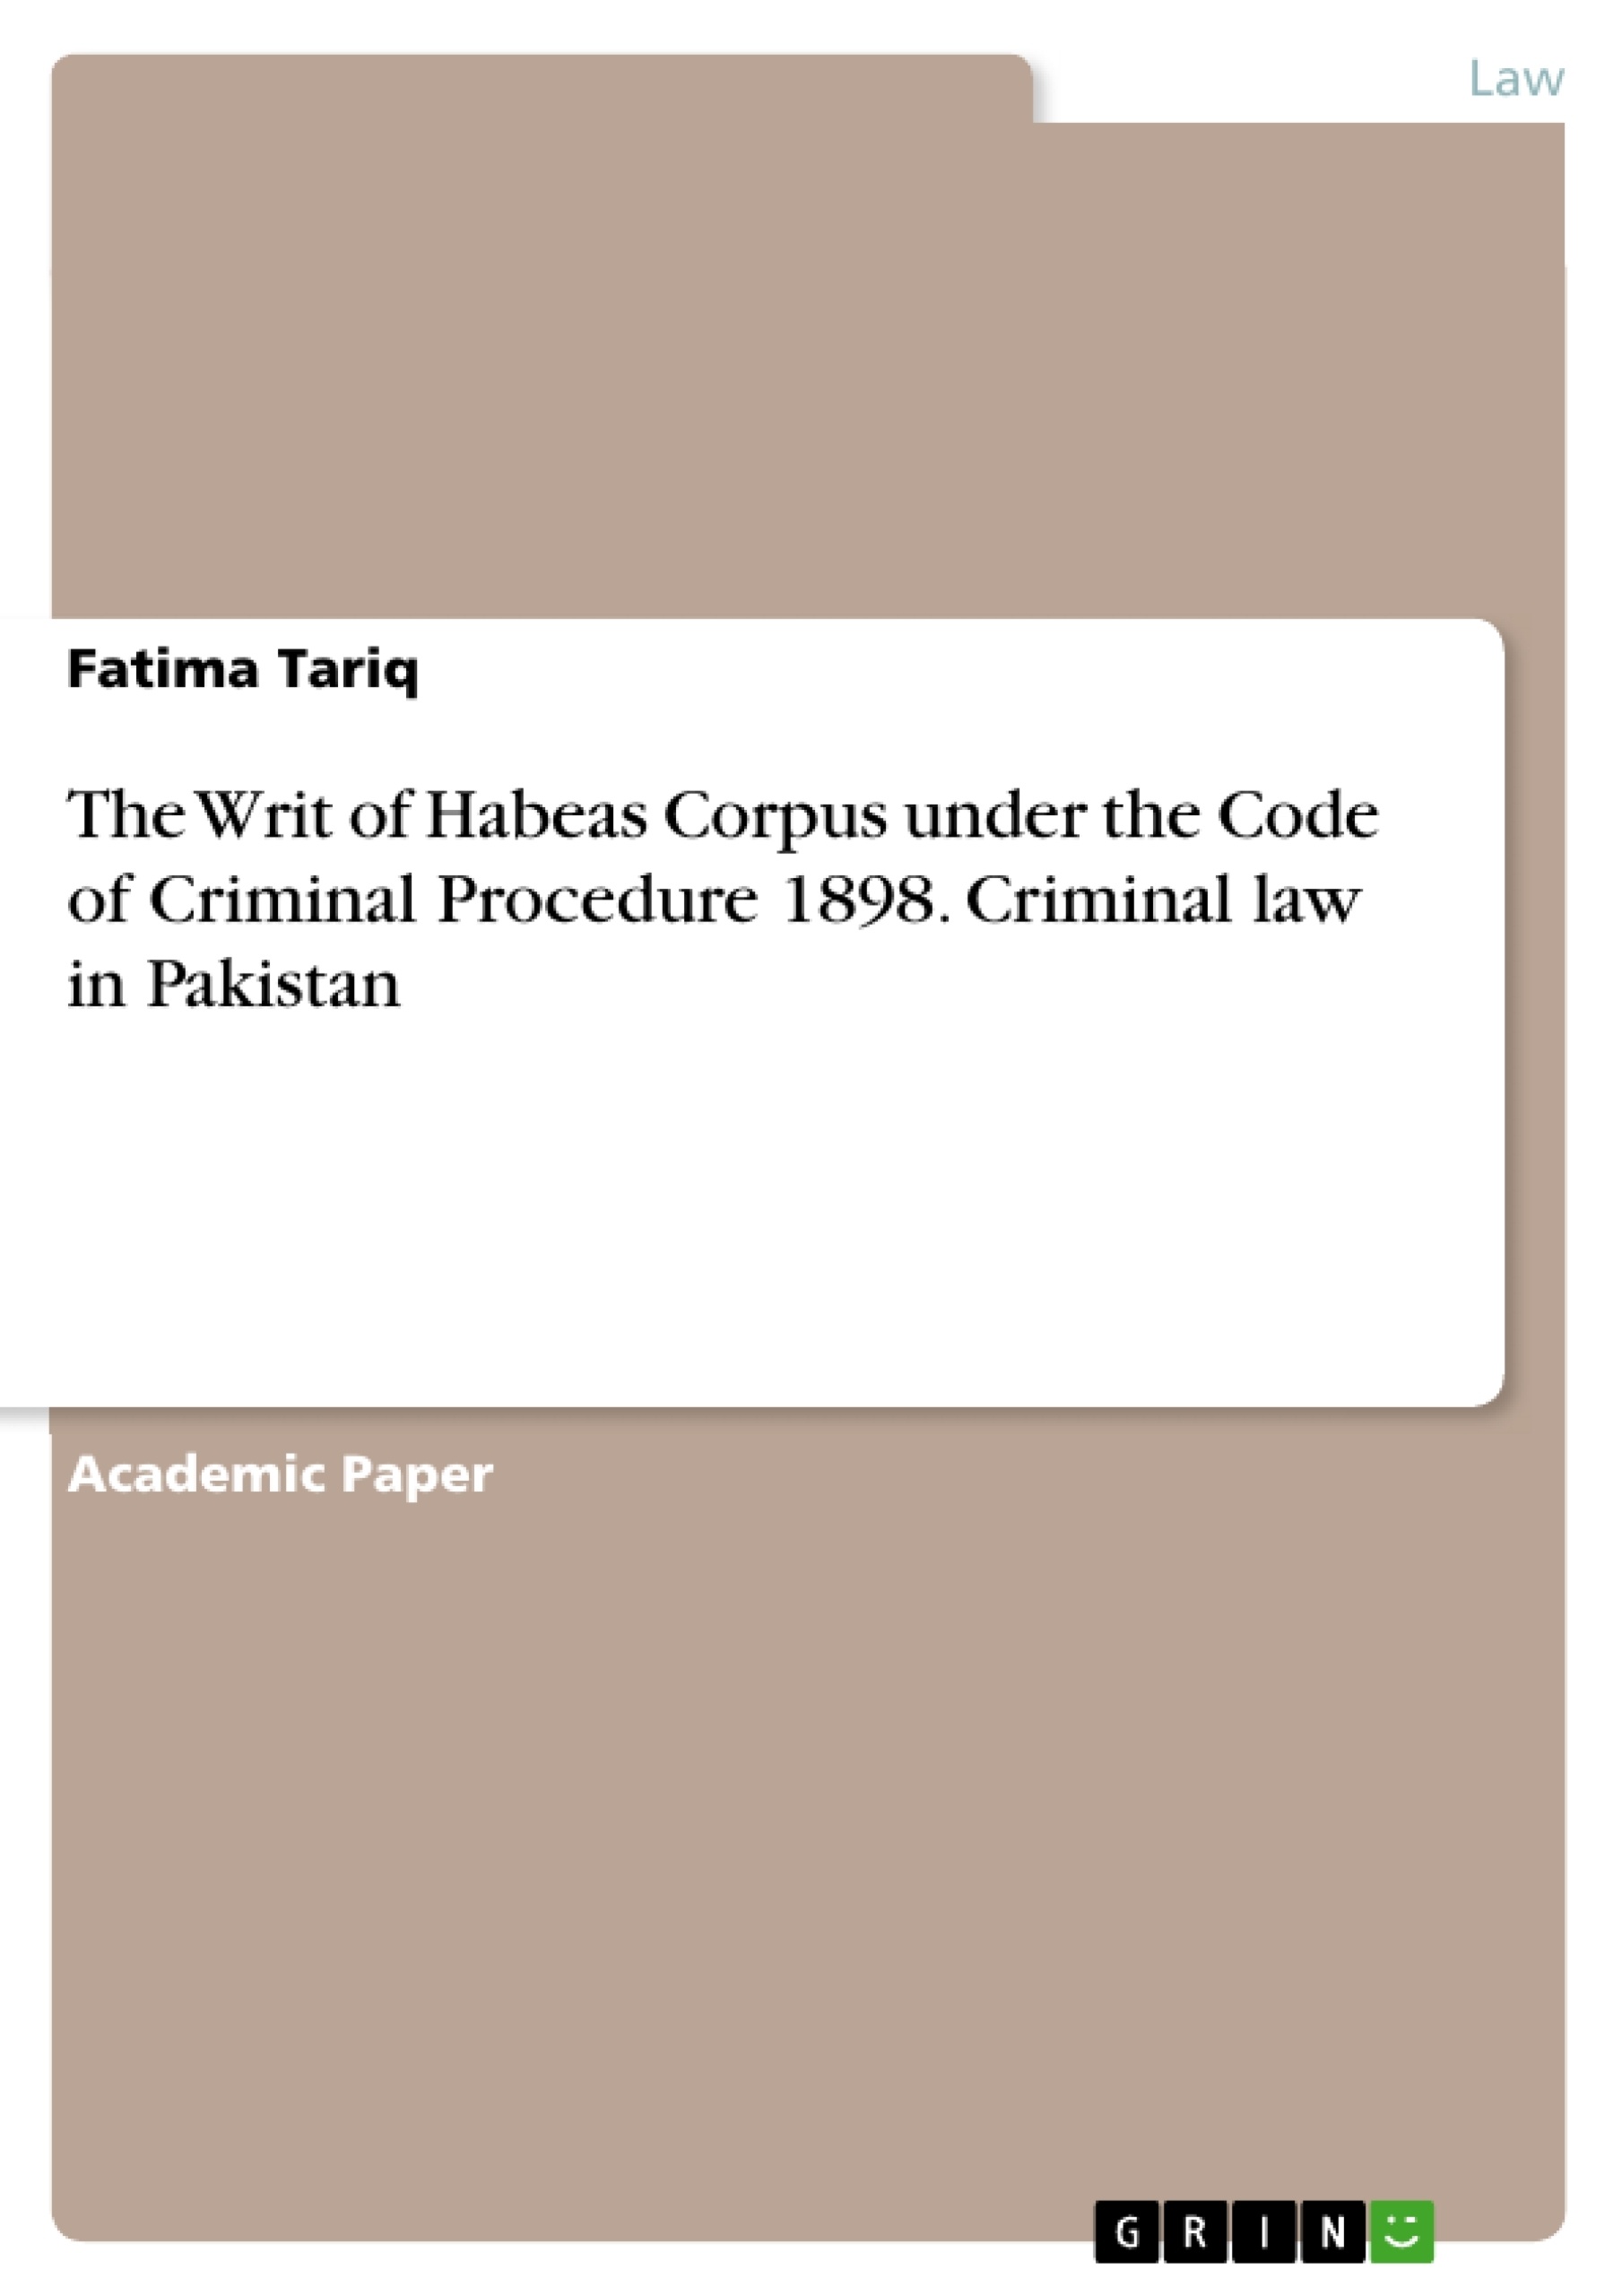 Title: The Writ of Habeas Corpus under the Code of Criminal Procedure 1898. Criminal law in Pakistan